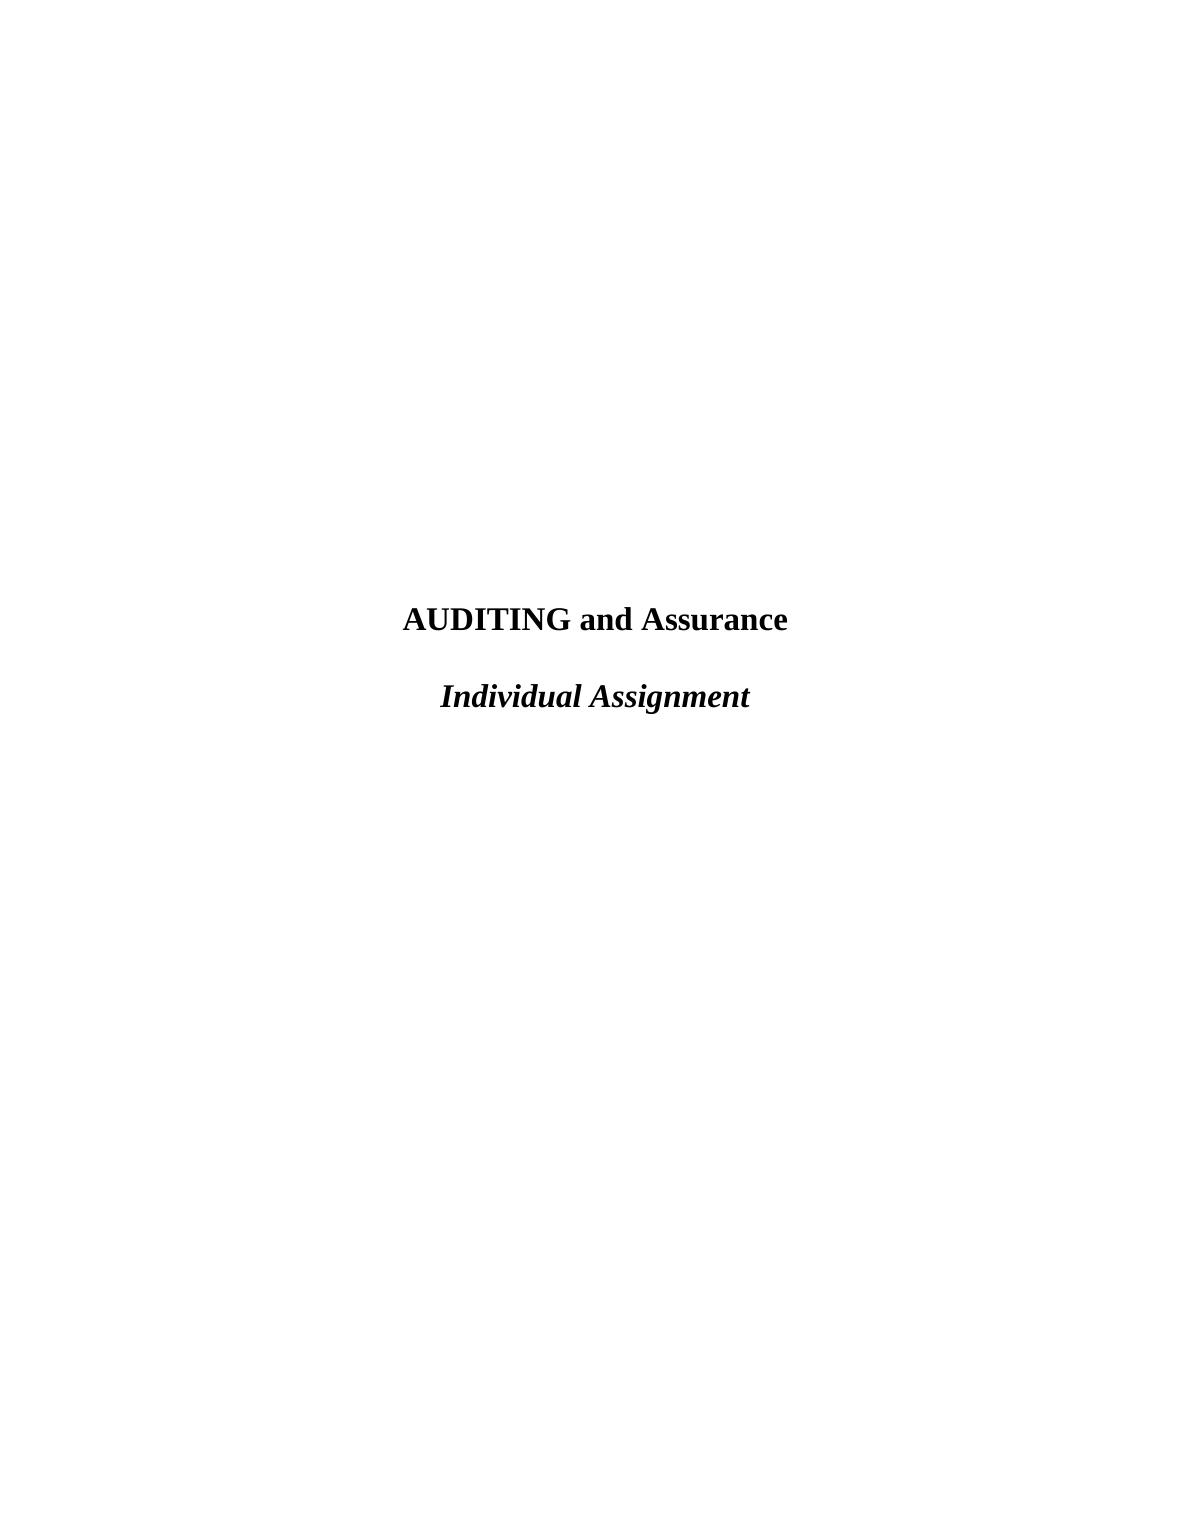 AUDITING and Assurance Individual Assignment Contents Introduction_1